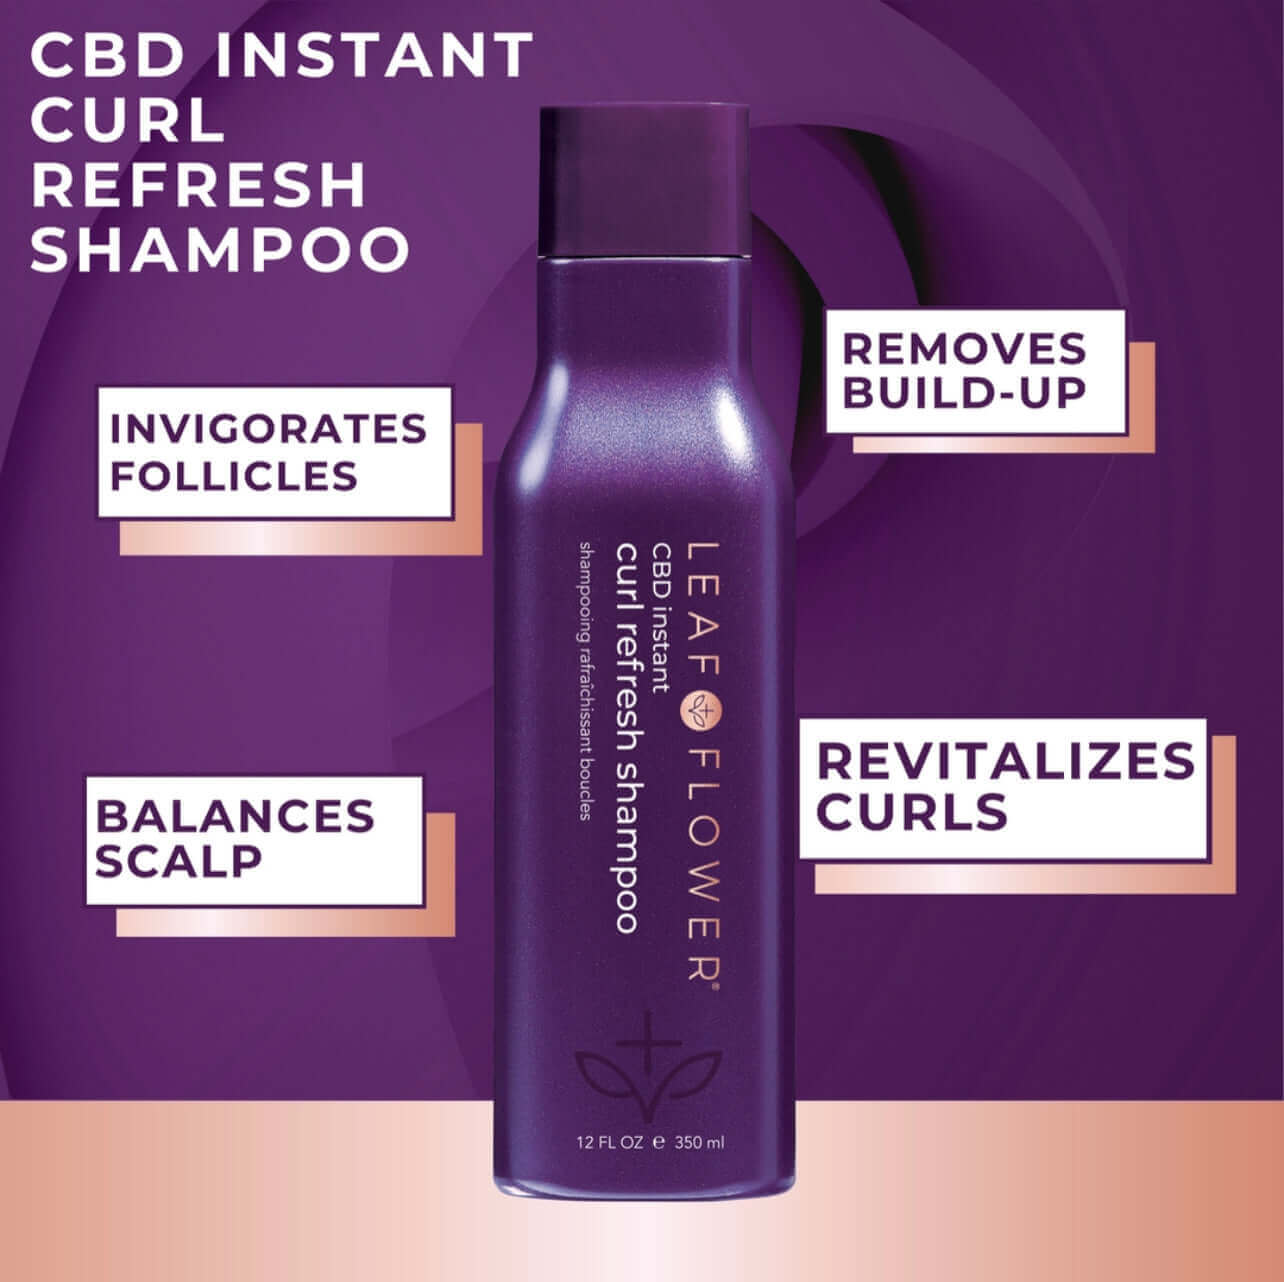 Promotional graphic for Leaf & Flower Instant Curl Repair Shampoo and Conditioner Duo highlighting benefits such as invigorating follicles, balancing scalp, and reviving curls with essential hydration.